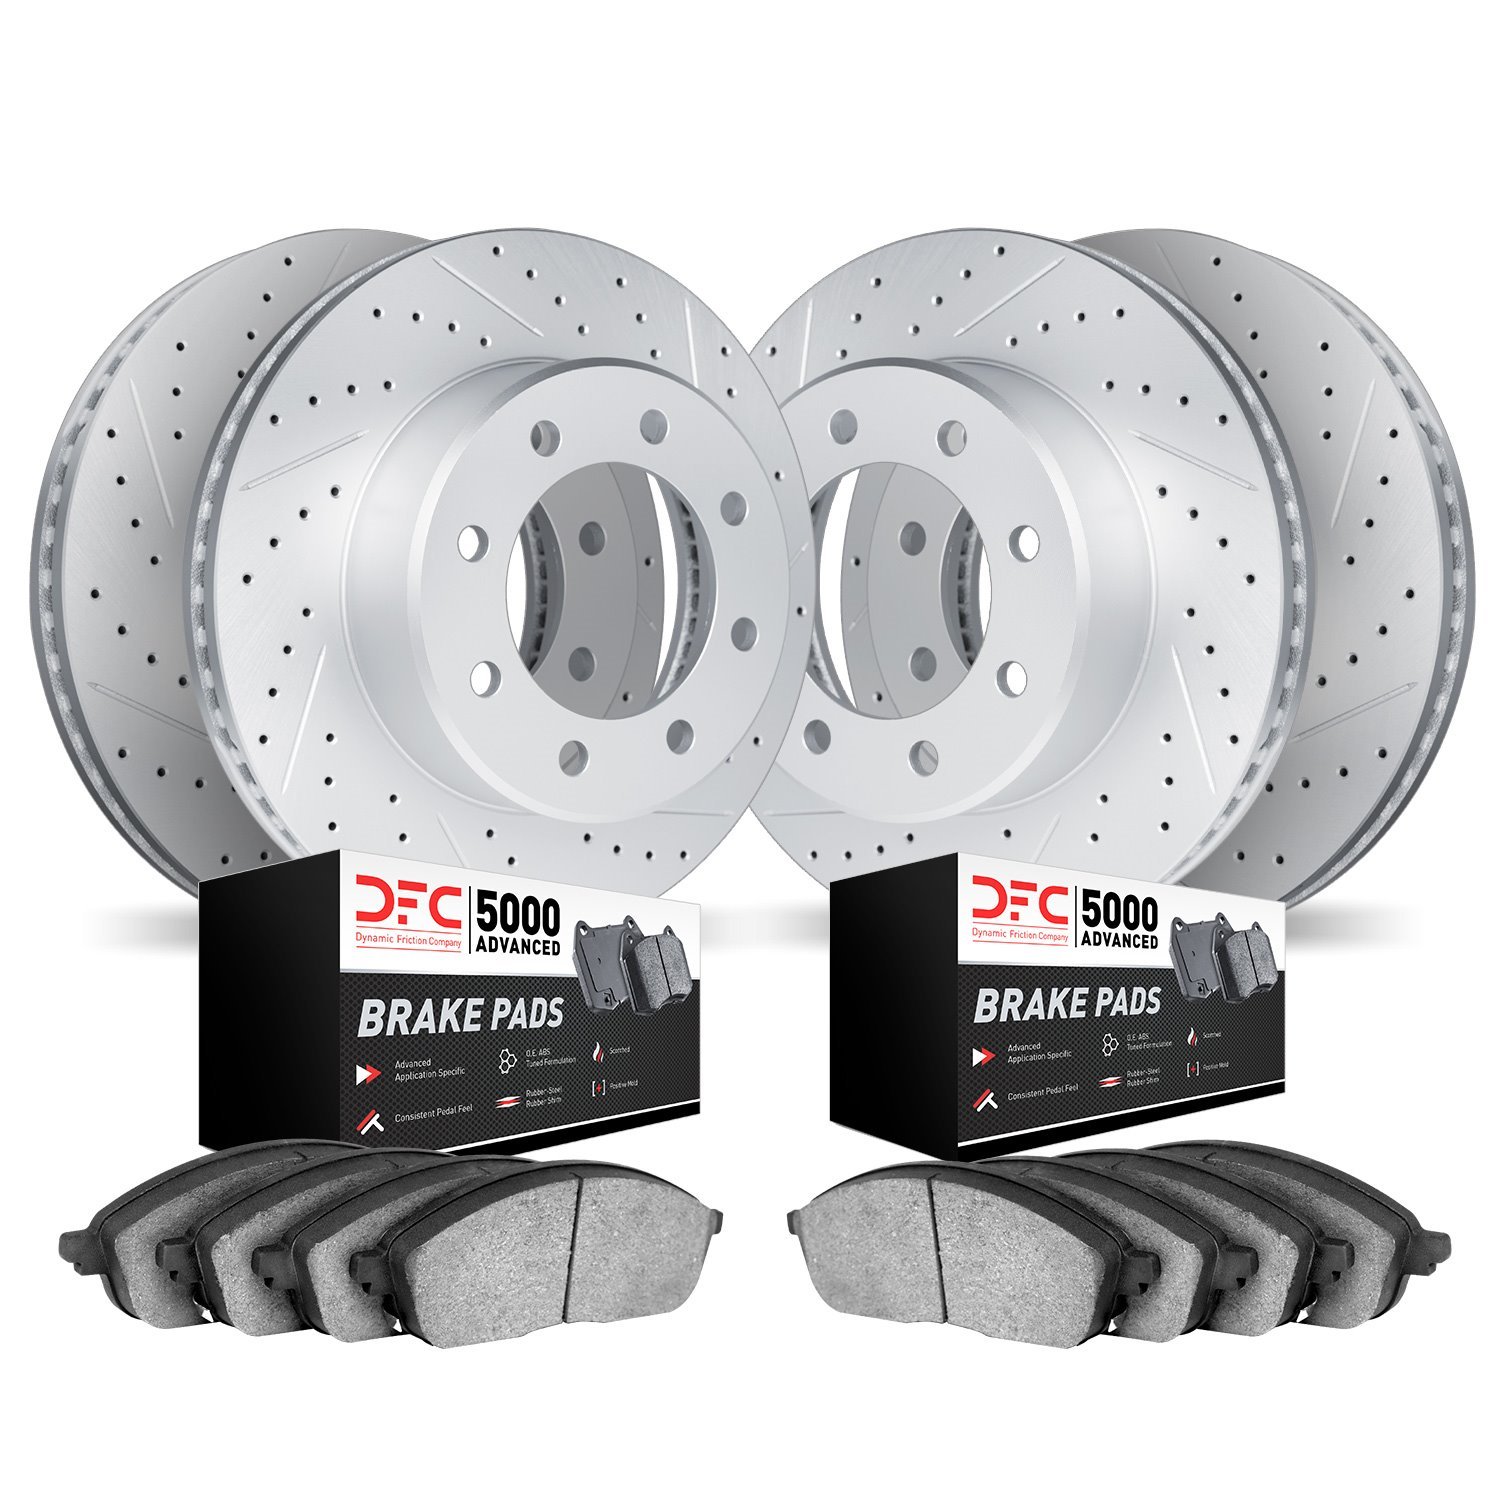 2504-54279 Geoperformance Drilled/Slotted Rotors w/5000 Advanced Brake Pads Kit, 2010-2012 Ford/Lincoln/Mercury/Mazda, Position: